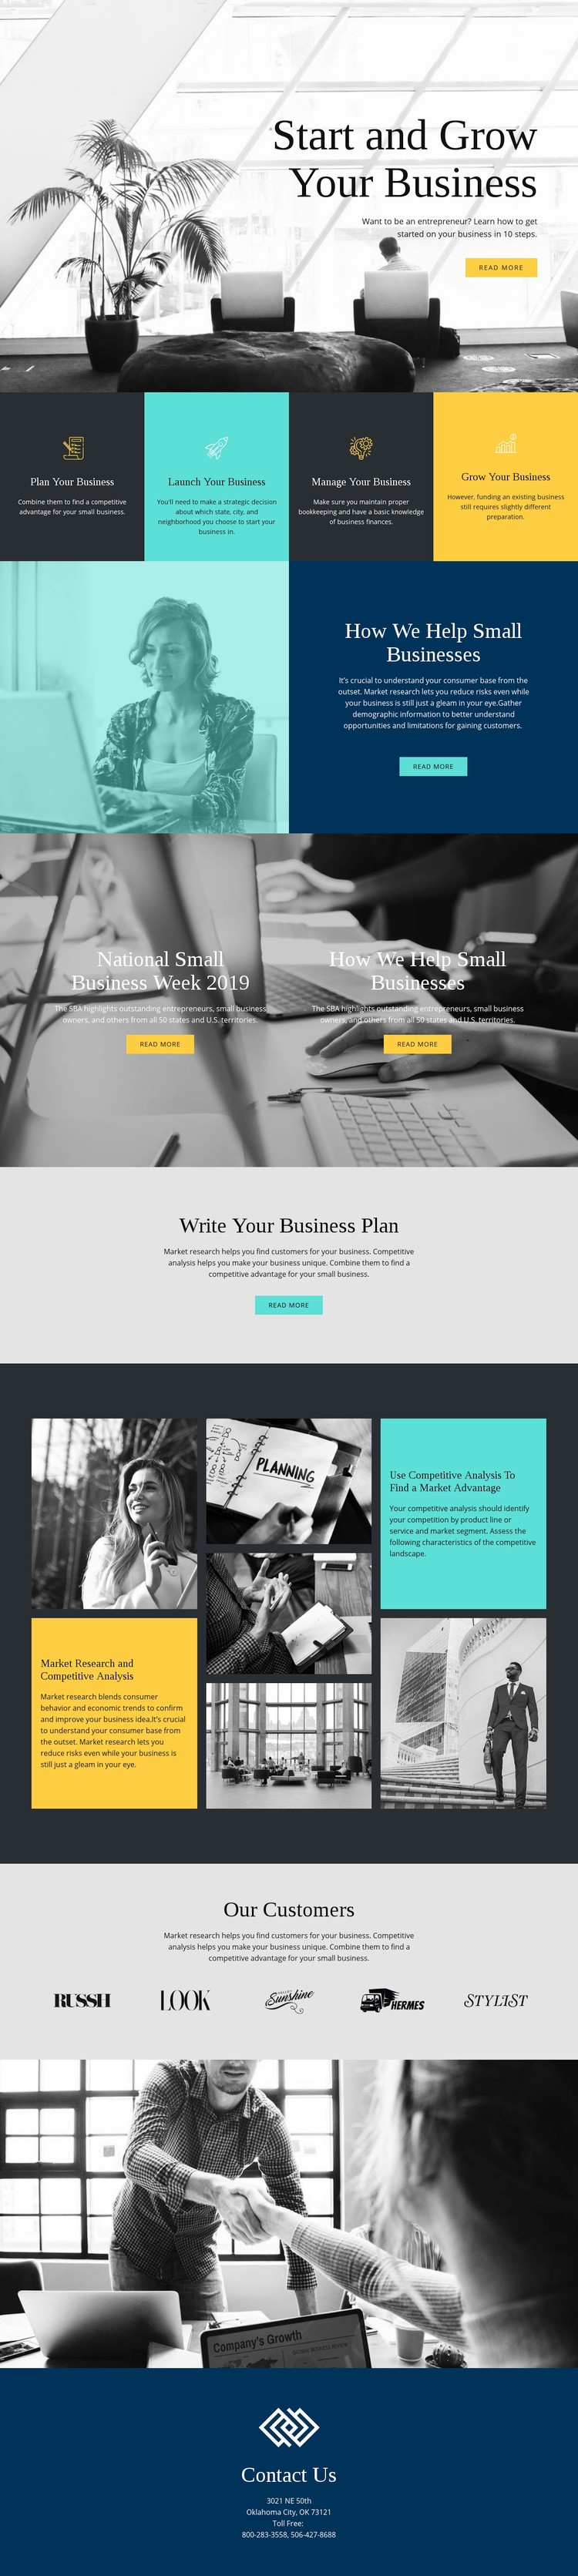 Start and grow your business Webflow Template Alternative